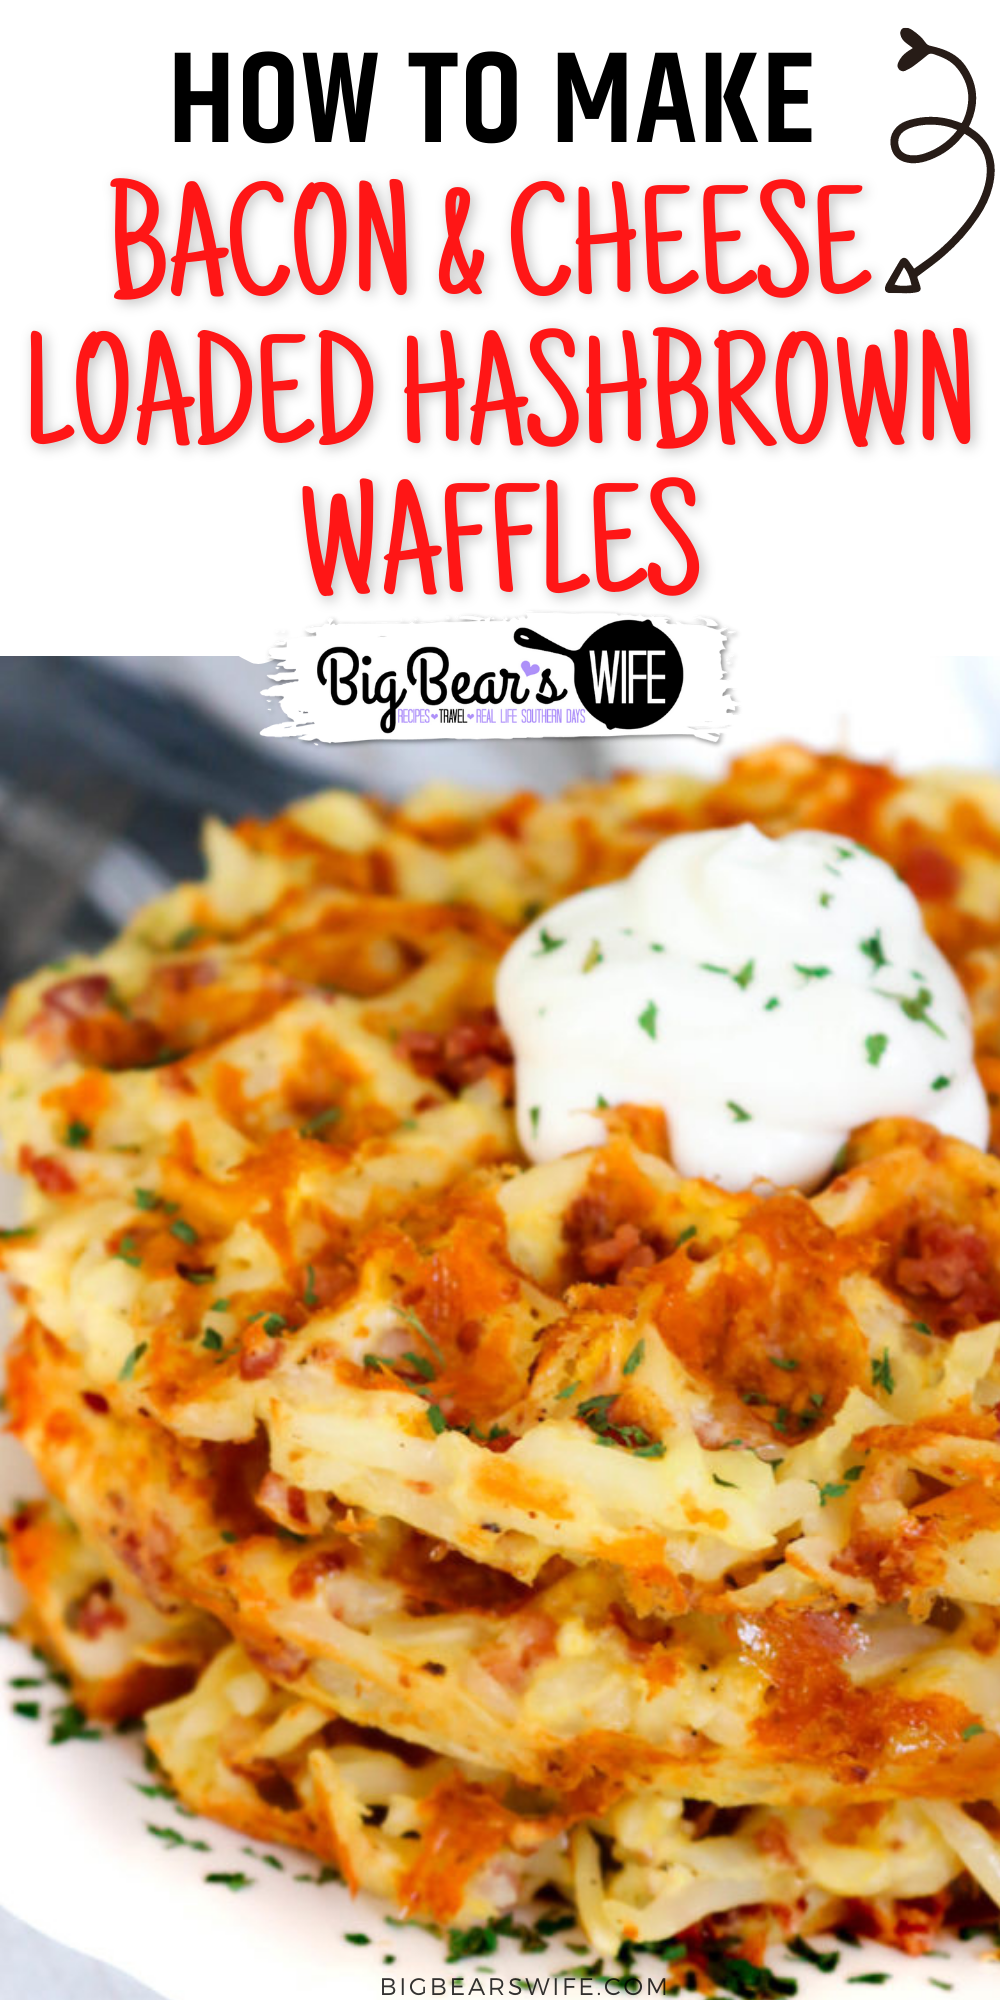 These Bacon and Cheese Loaded Hashbrown Waffles are packed with shredded hashbrowns, eggs, bacon and shredded cheese for the ultimate brunch entree!  via @bigbearswife